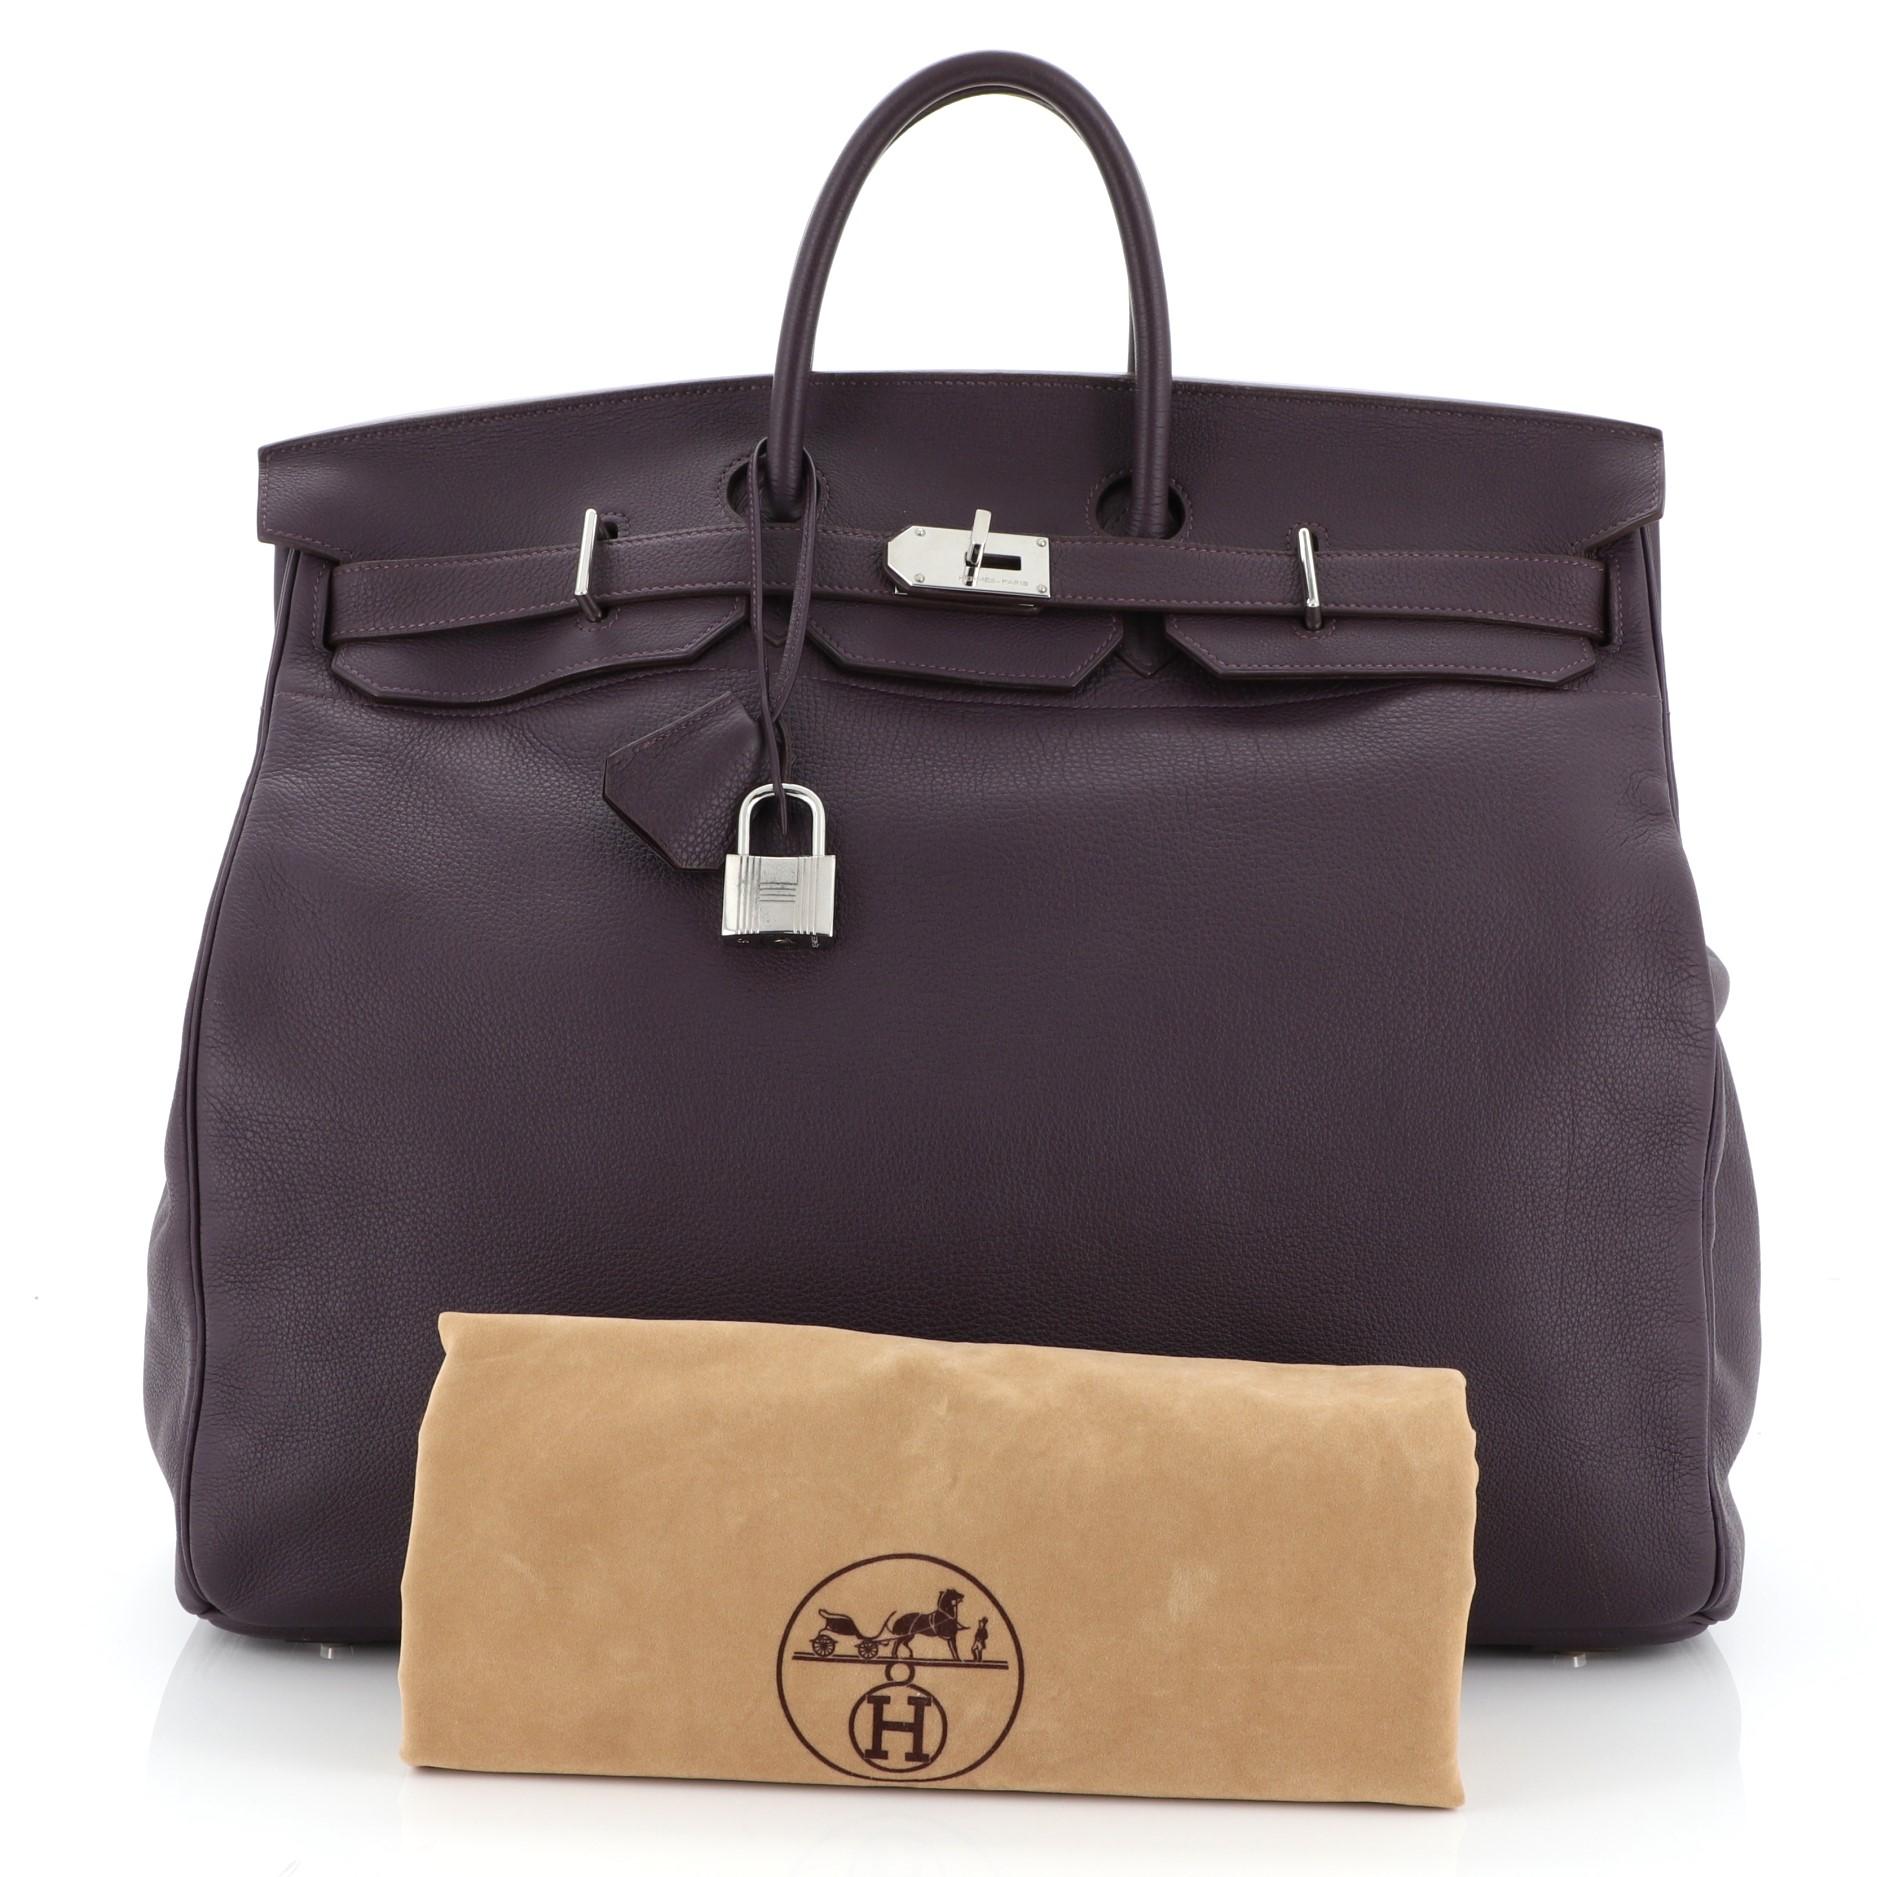 This Hermes HAC Birkin Bag Raisin Clemence with Palladium Hardware 50, crafted in Raisin purple Clemence leather, features dual rolled handles, front flap, and palladium hardware. Its turn-lock closure opens to a Raisin purple Clemence leather